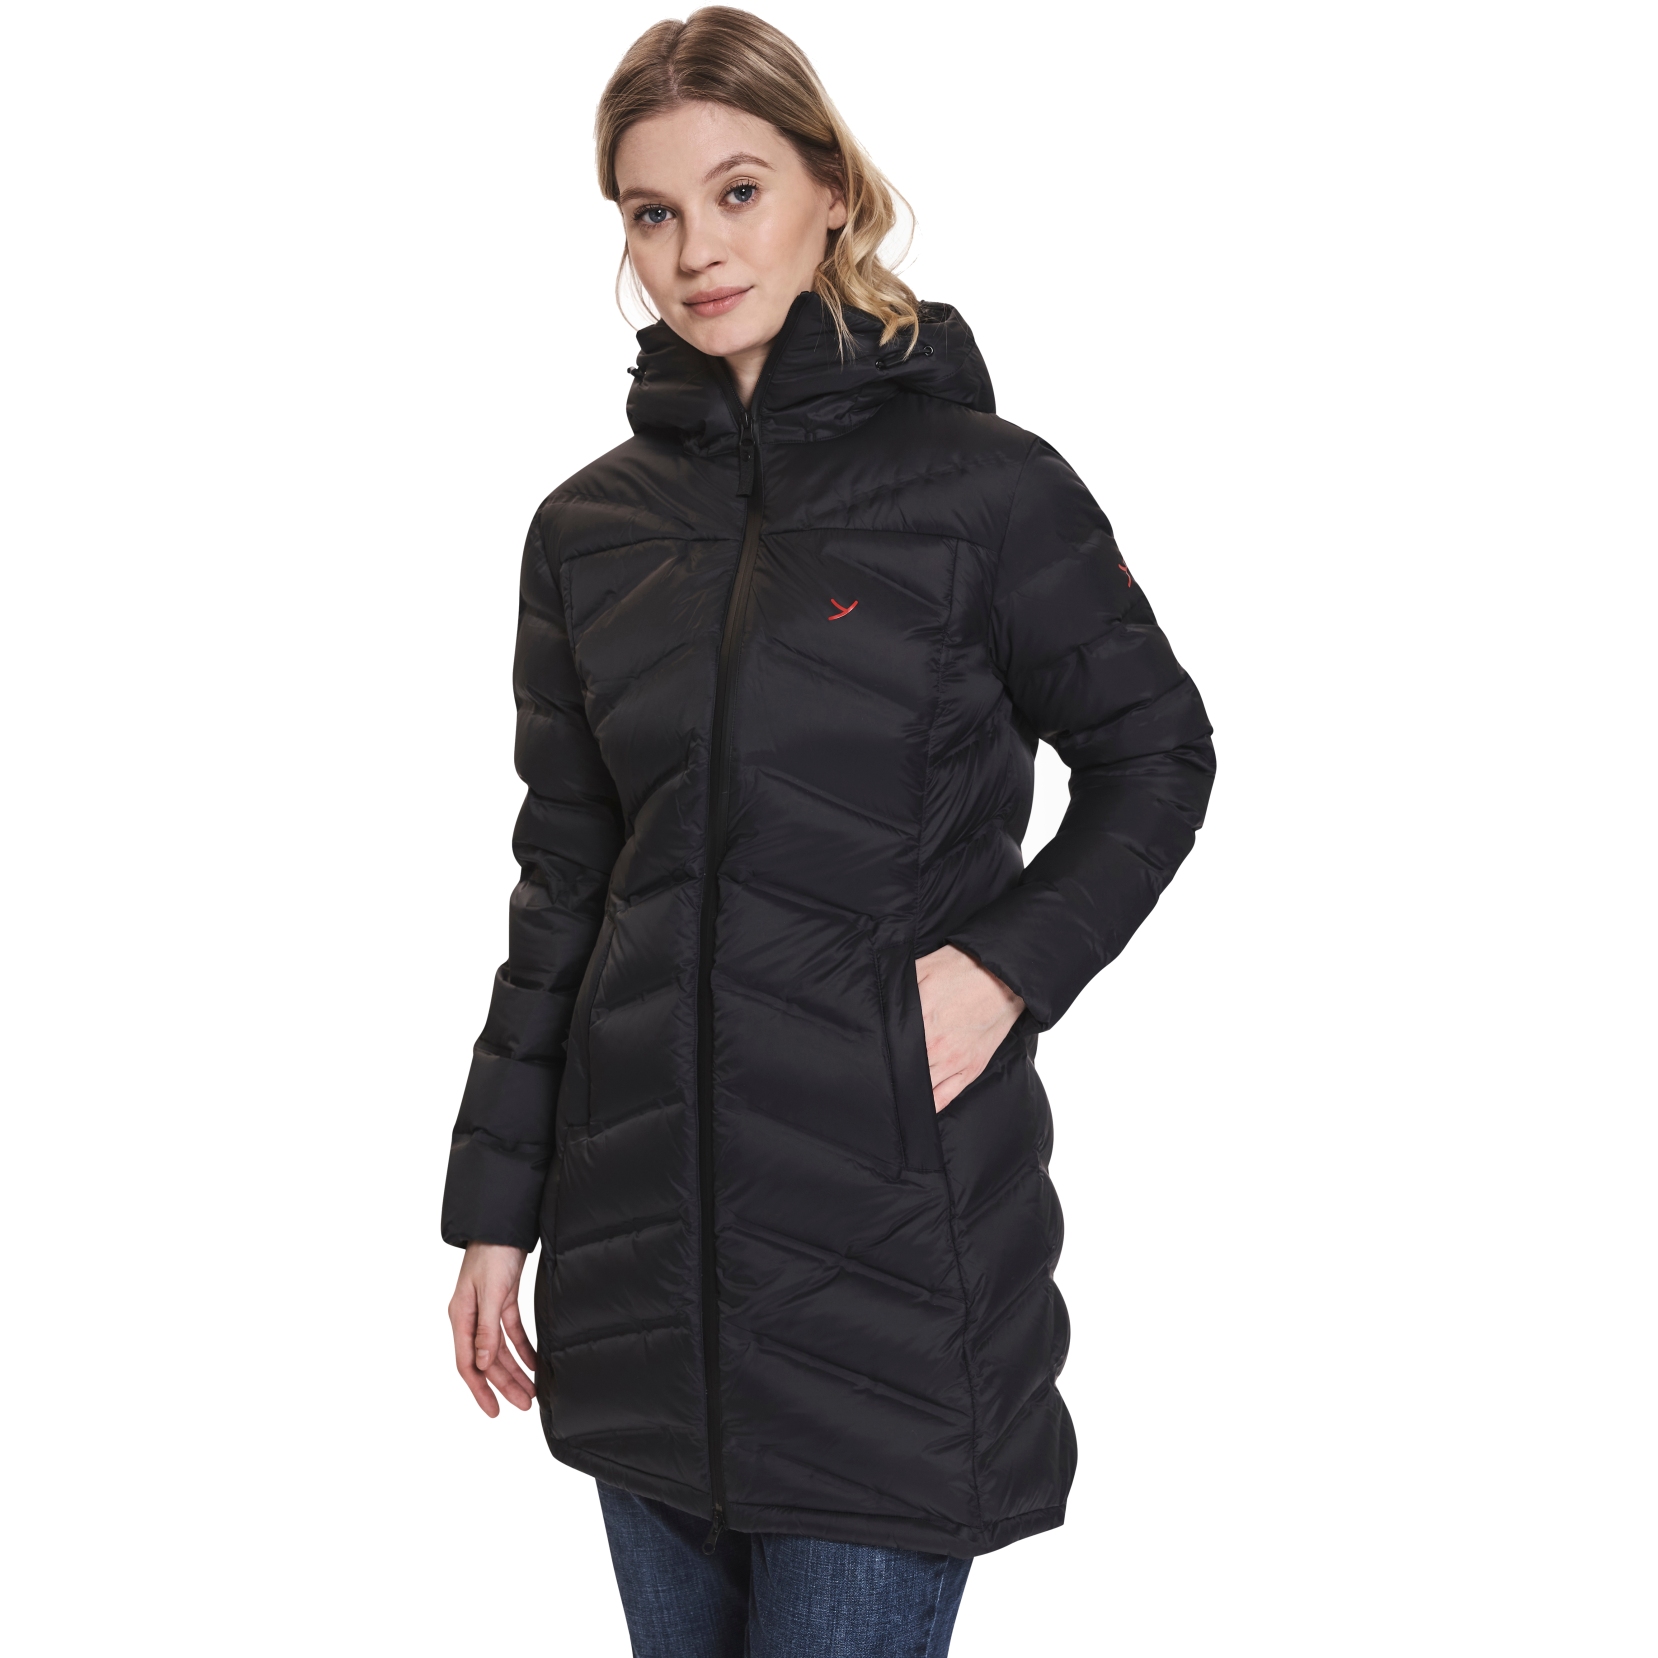 Picture of Y by Nordisk Patea Down Coat Women - black